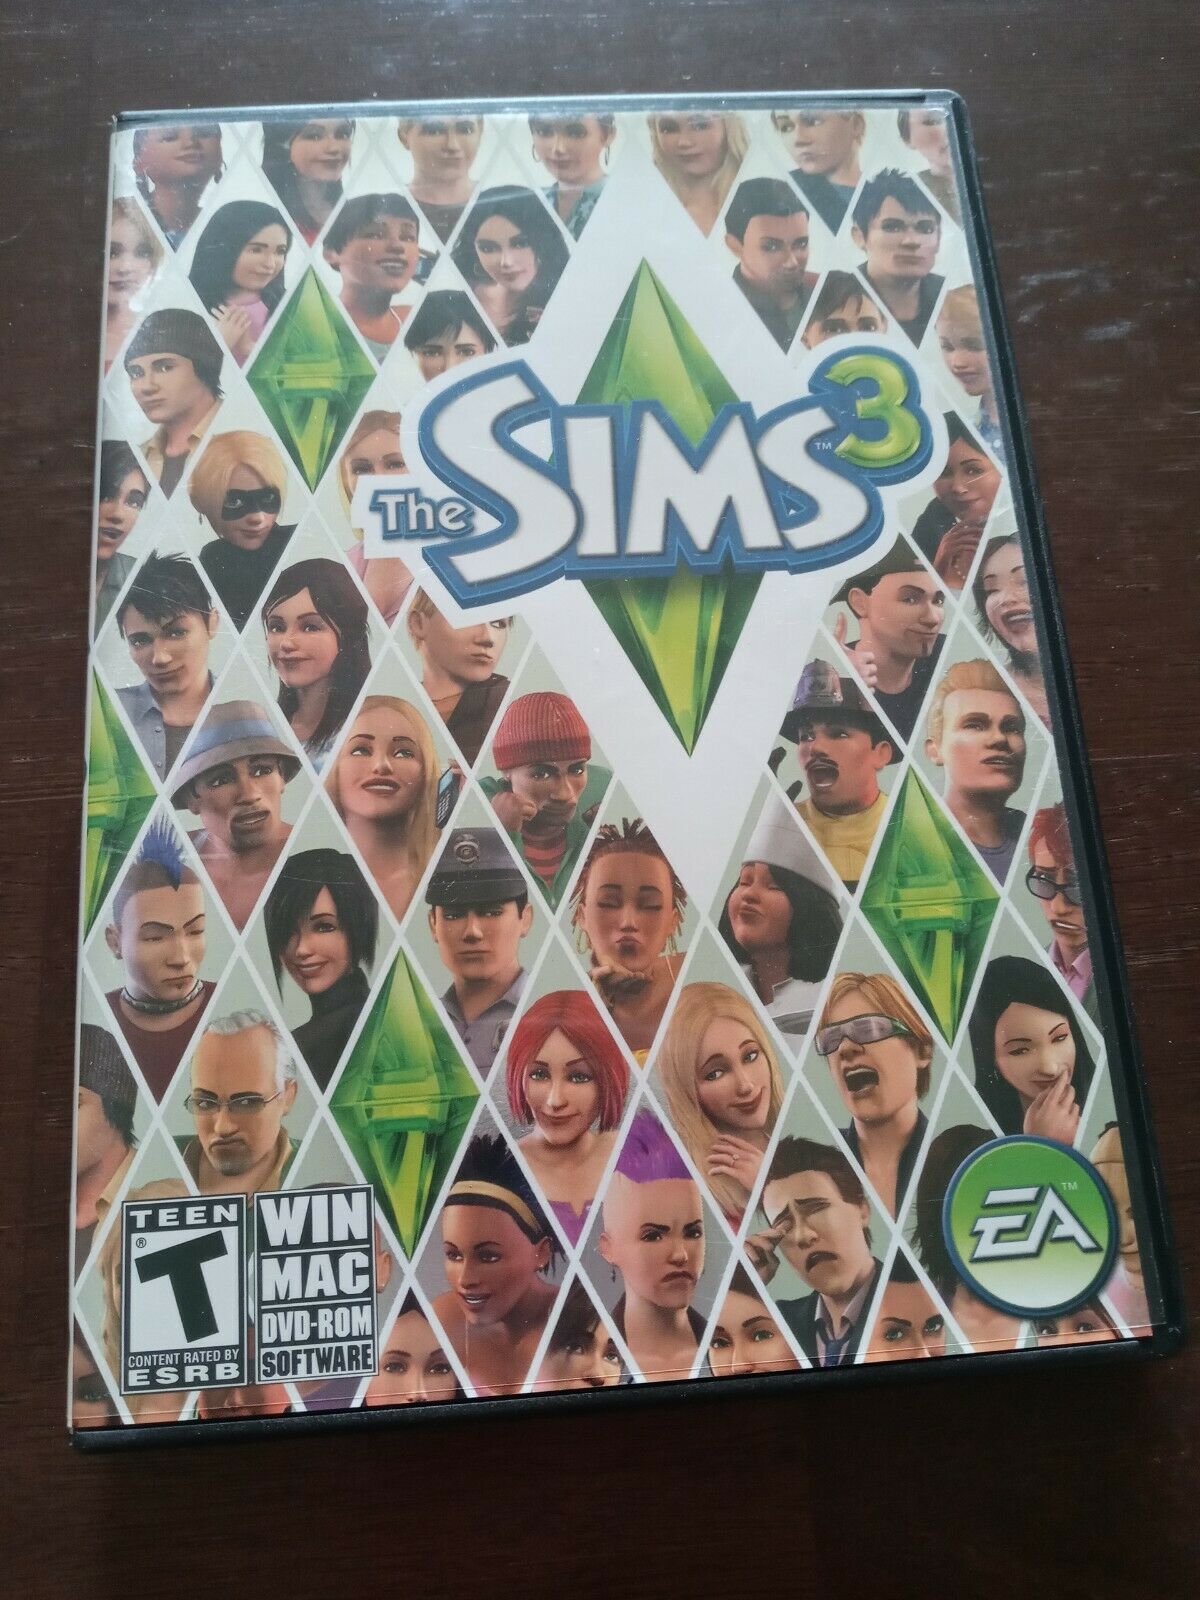 Primary image for The Sims 3 - PC - DVD-ROM - VERY GOOD